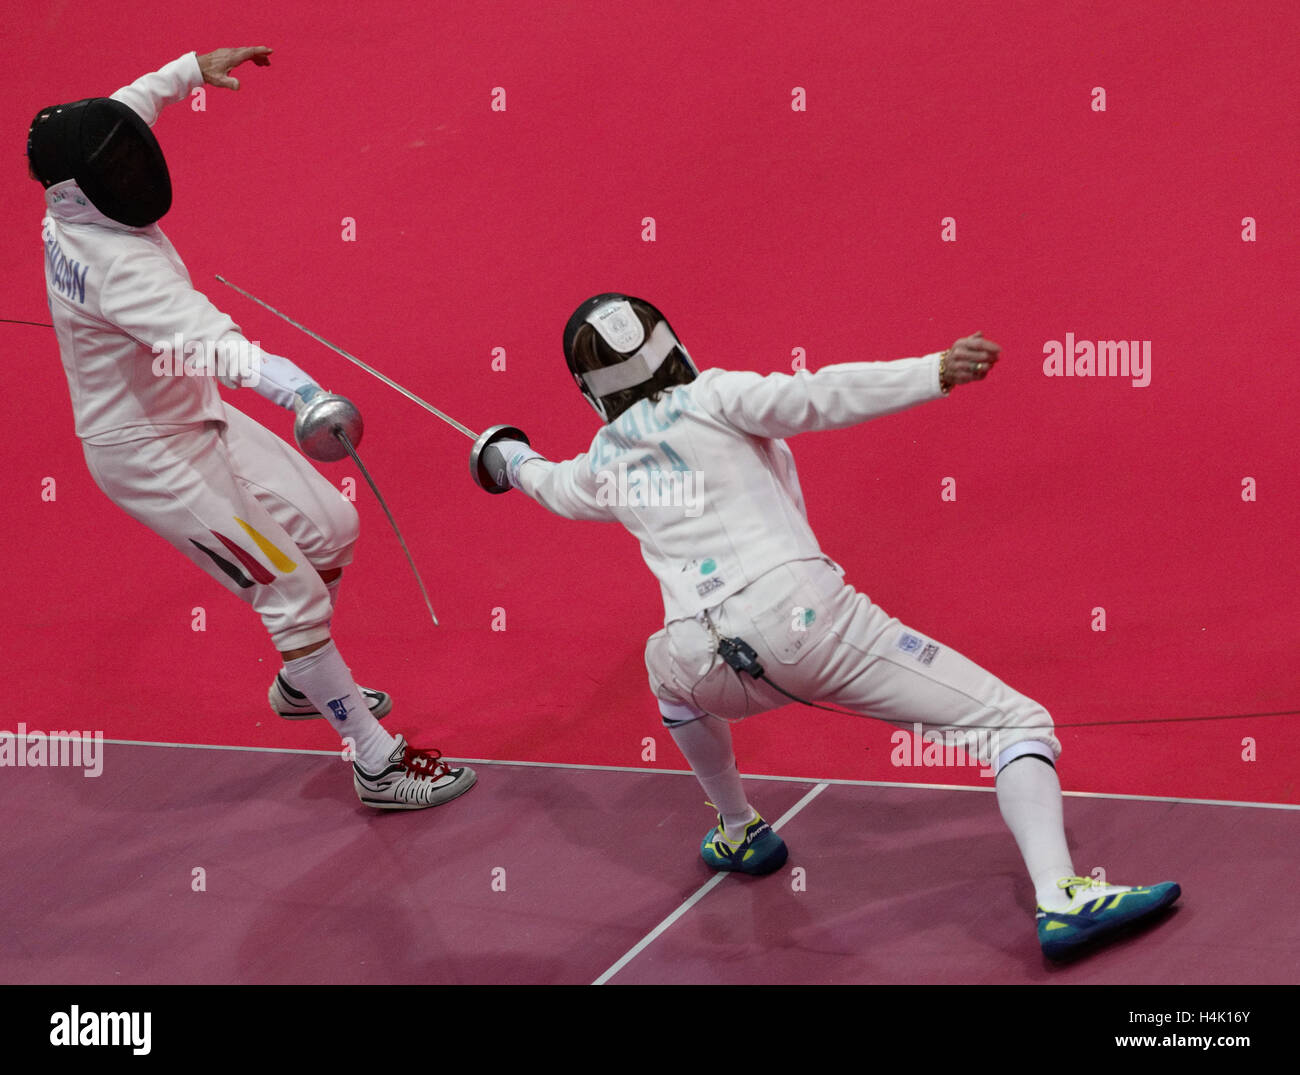 German fencer Ute Schiffmann (sword, l) in a fight against Marie-Chantal Demaille during the team battle at the Fencing World Championships of senior citizens in Stralsund, Germany, 13 October 2016 . Photo: Peter Endig/dpa - NO WIRE SERVICE- Stock Photo